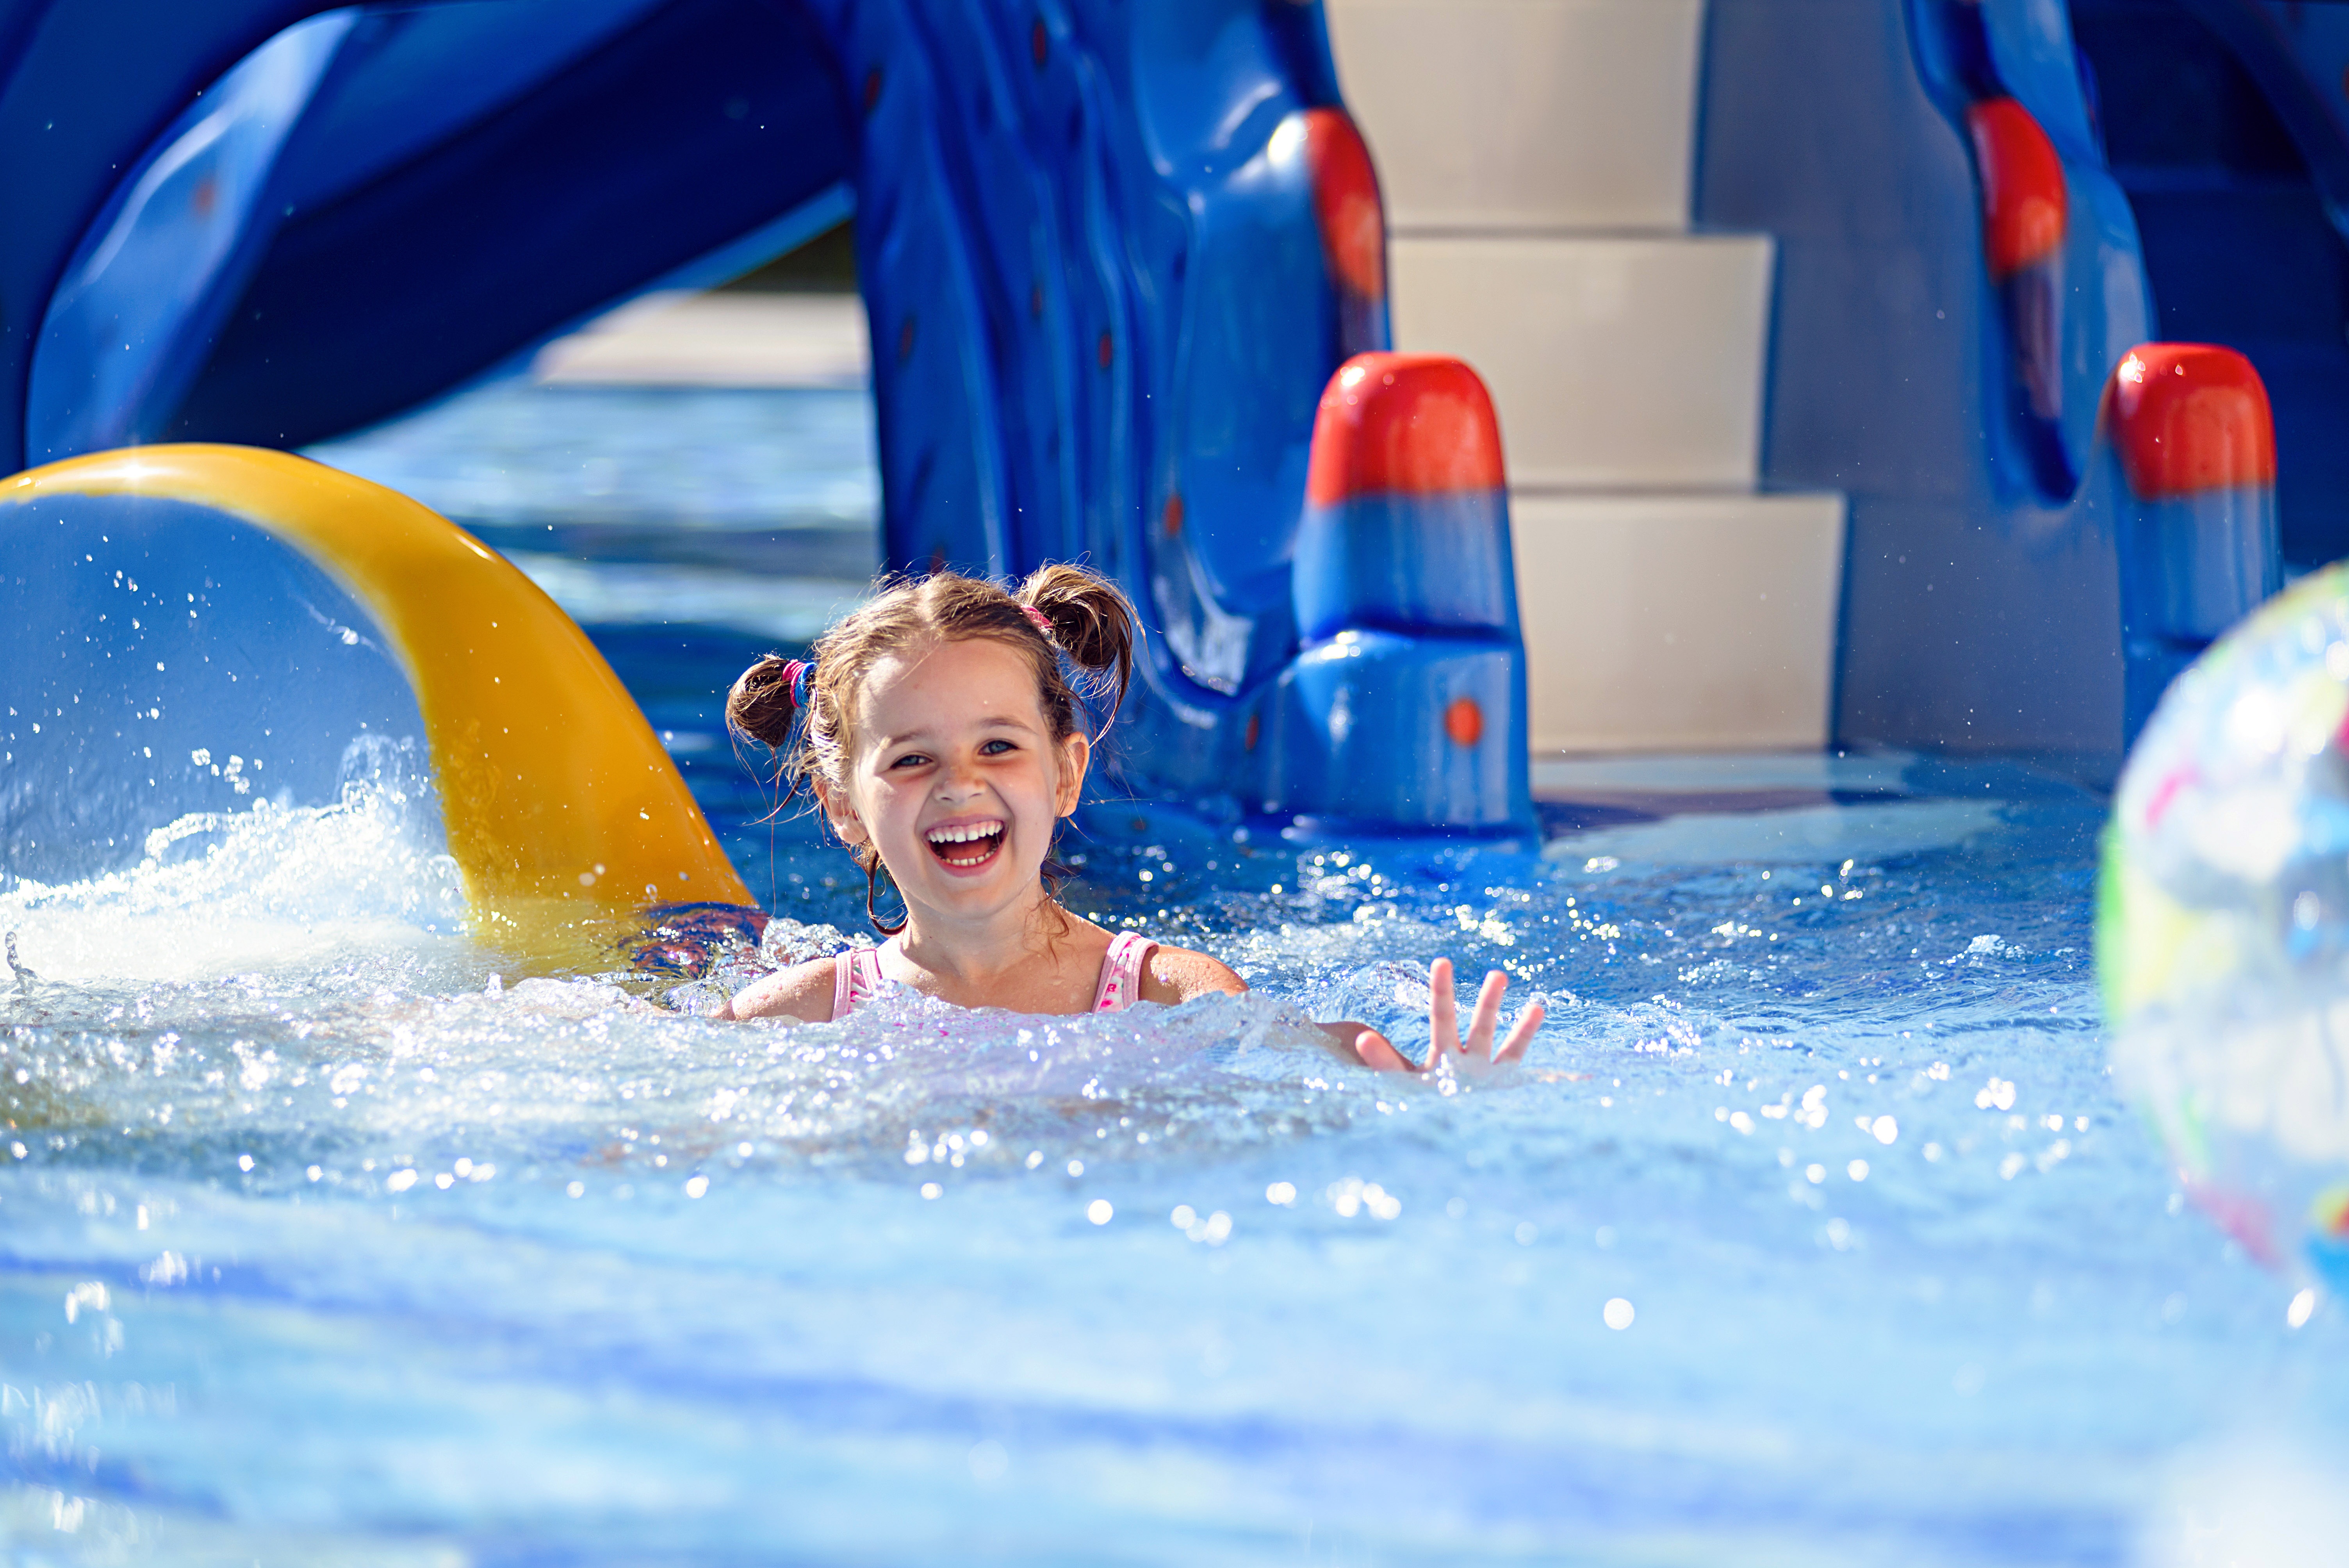 Check Out the Y’s Community Pools in Las Vegas